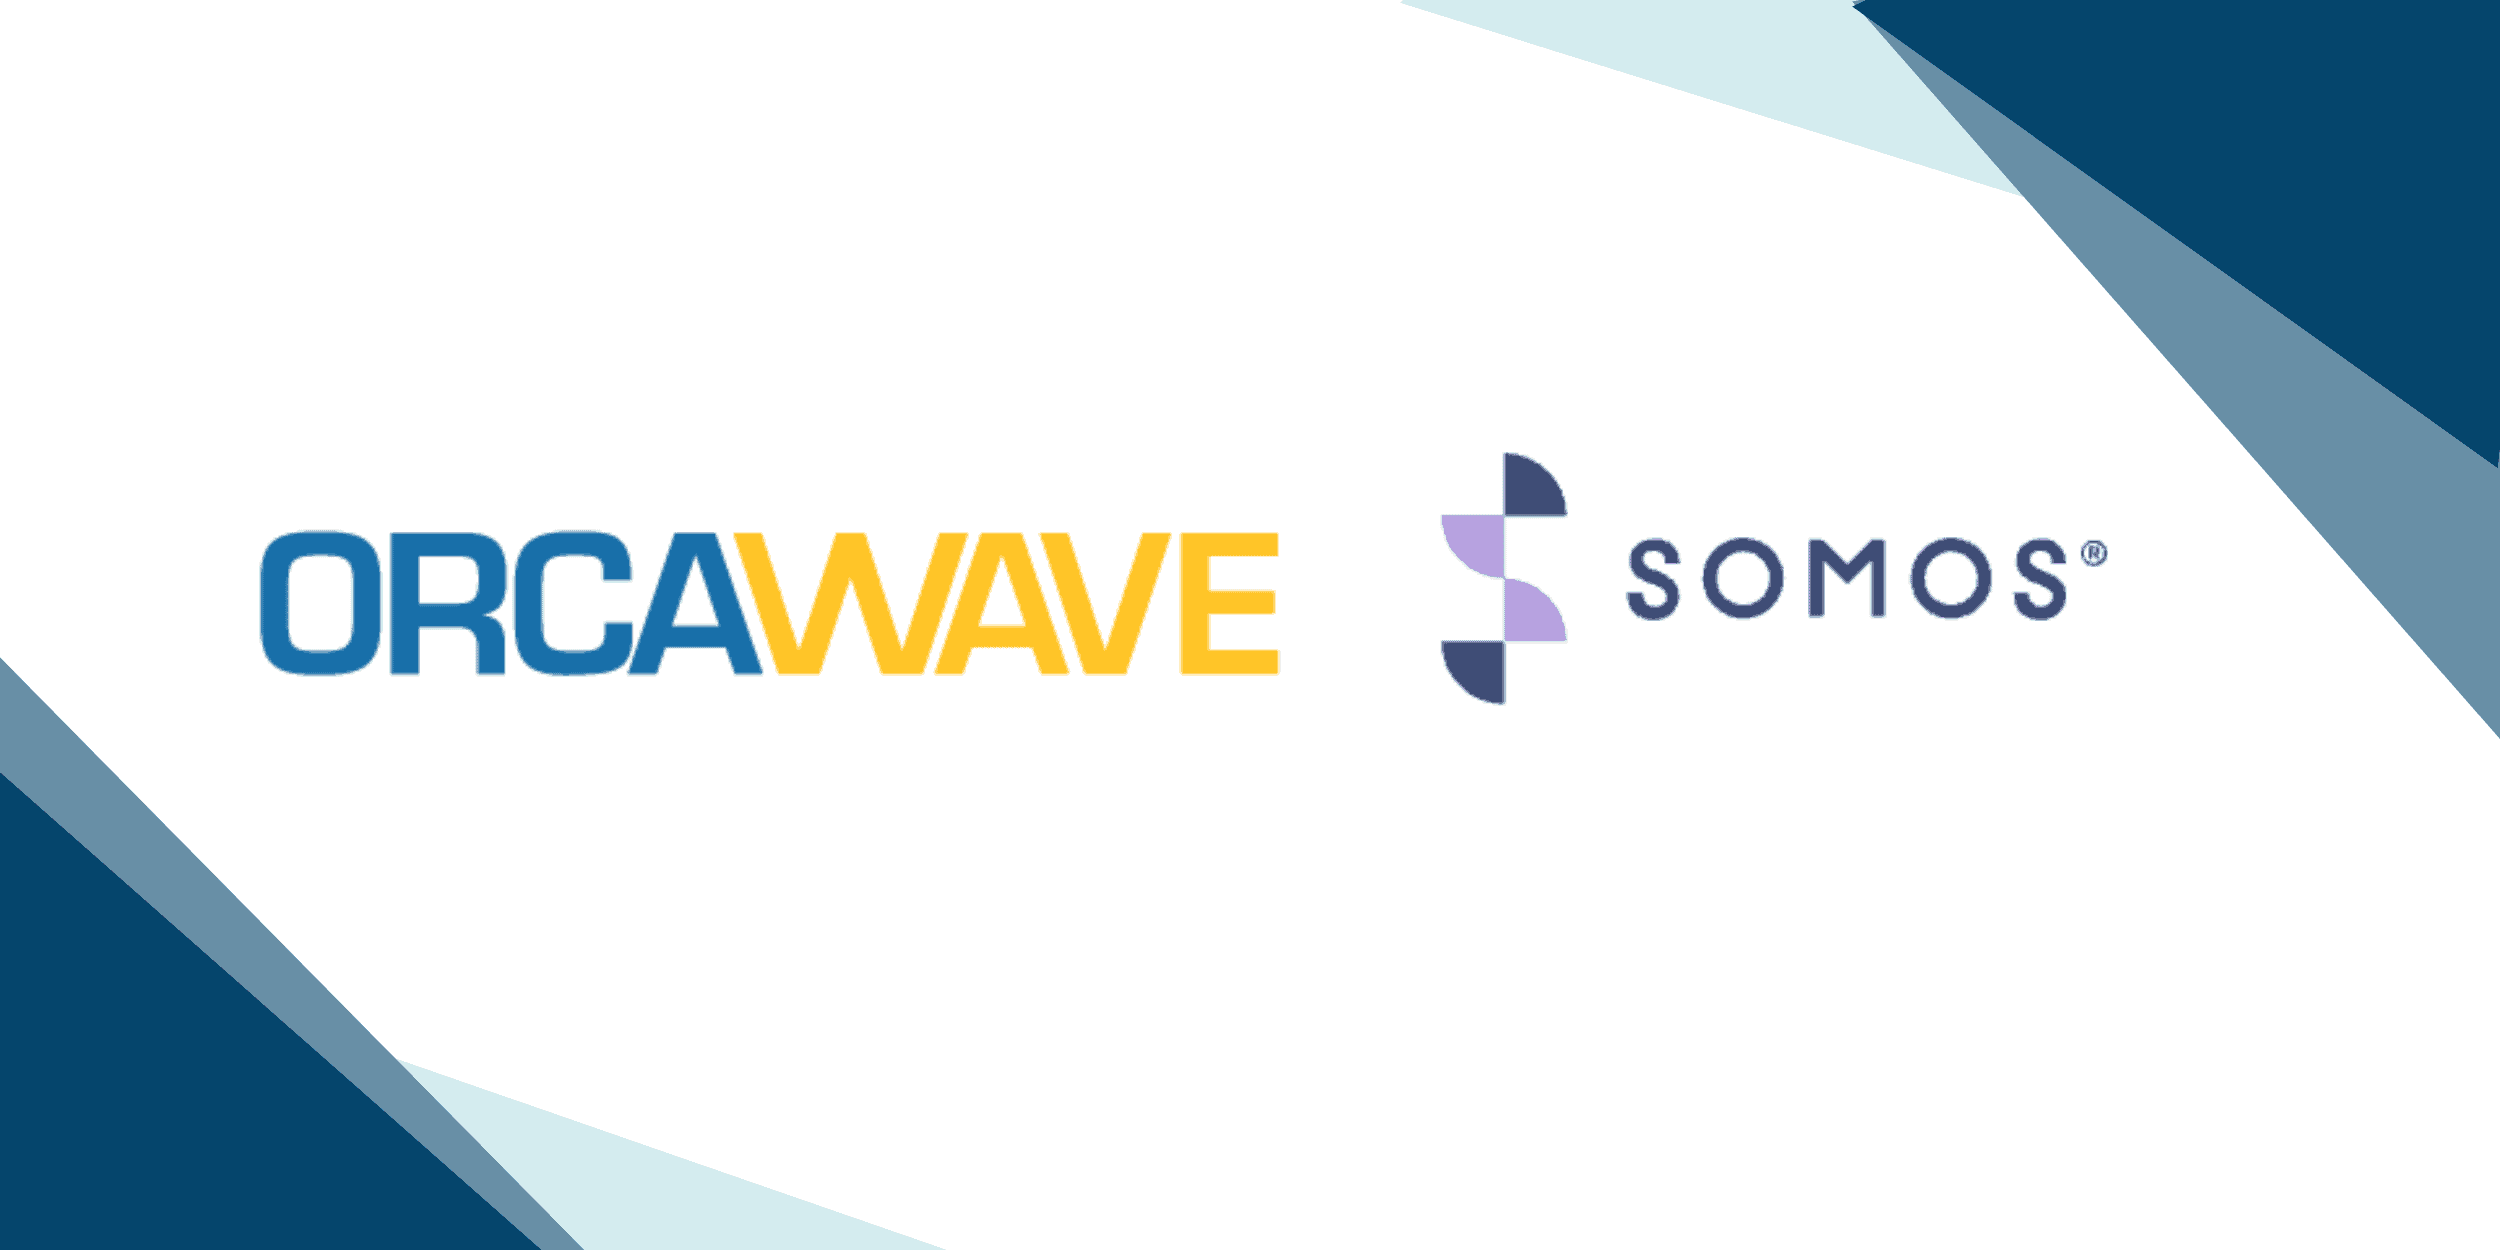 Orca Wave Announces Authorized Distributor Partnership with Somos